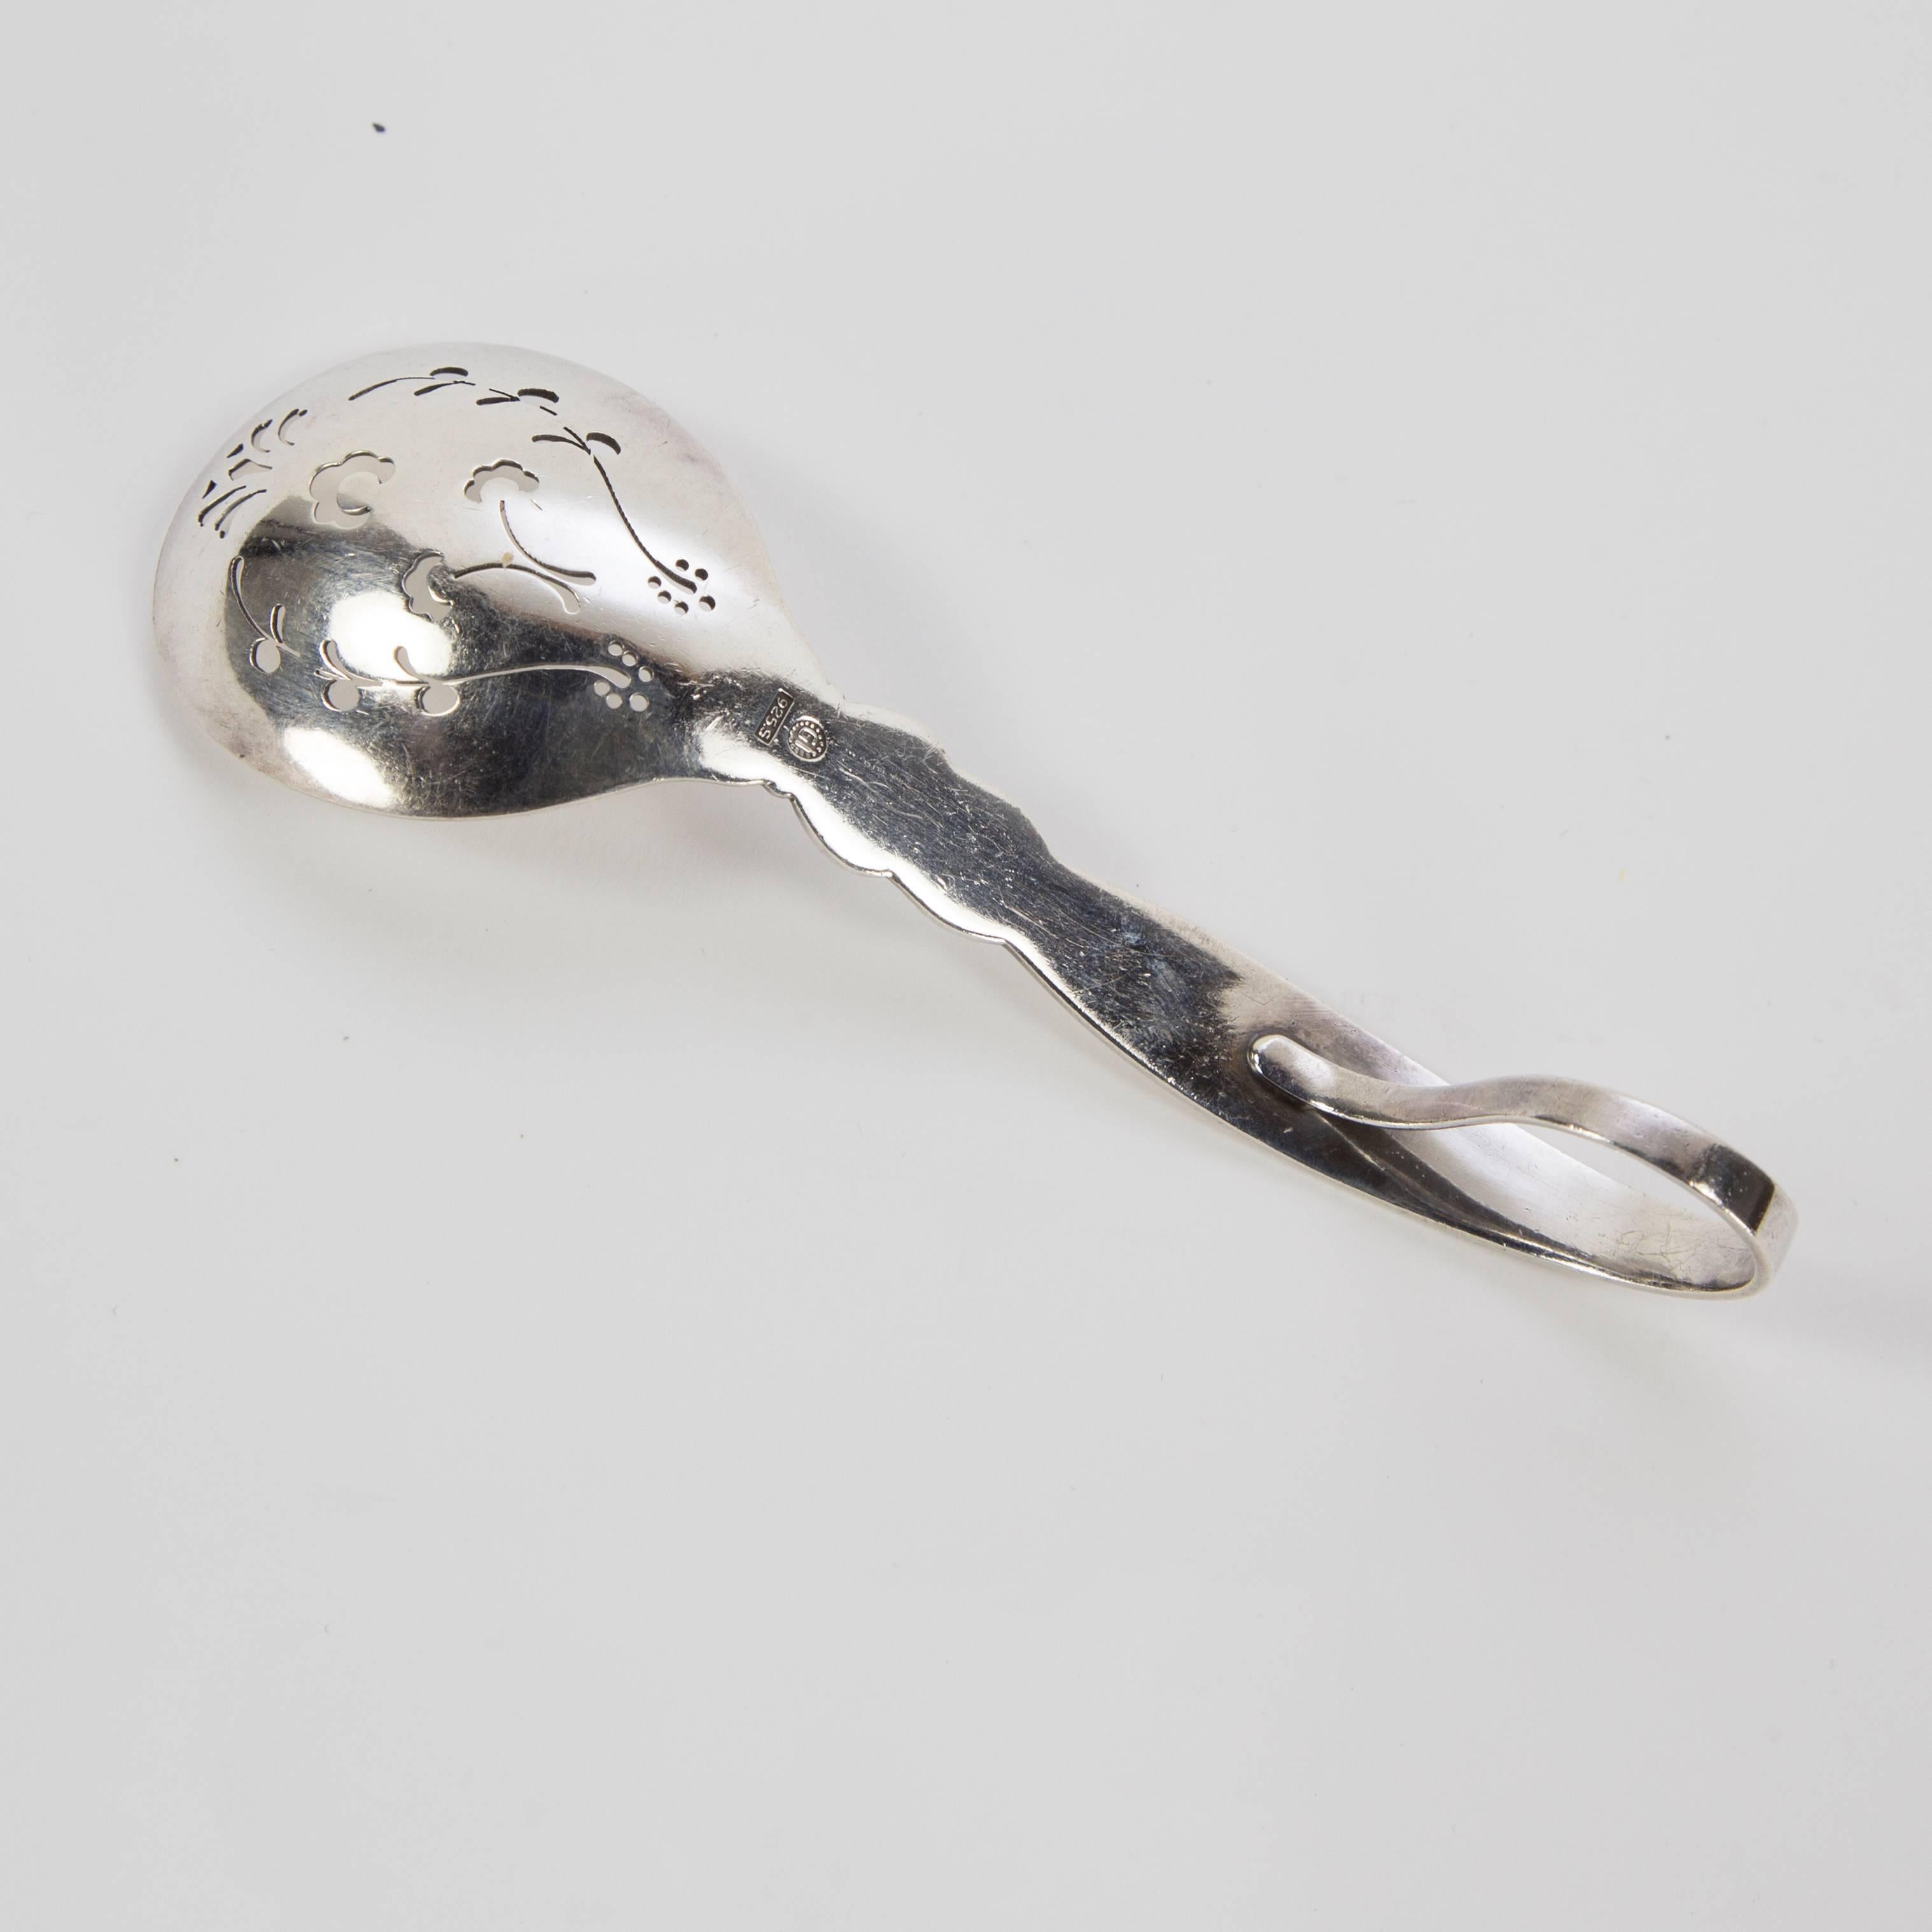 Georg Jensen sterling silver pierced serving berry spoon with curved handle; cactus pattern; Copenhagen, Denmark, circa 1930s; measure: approx. 5.5” long x CH YD $395.
 